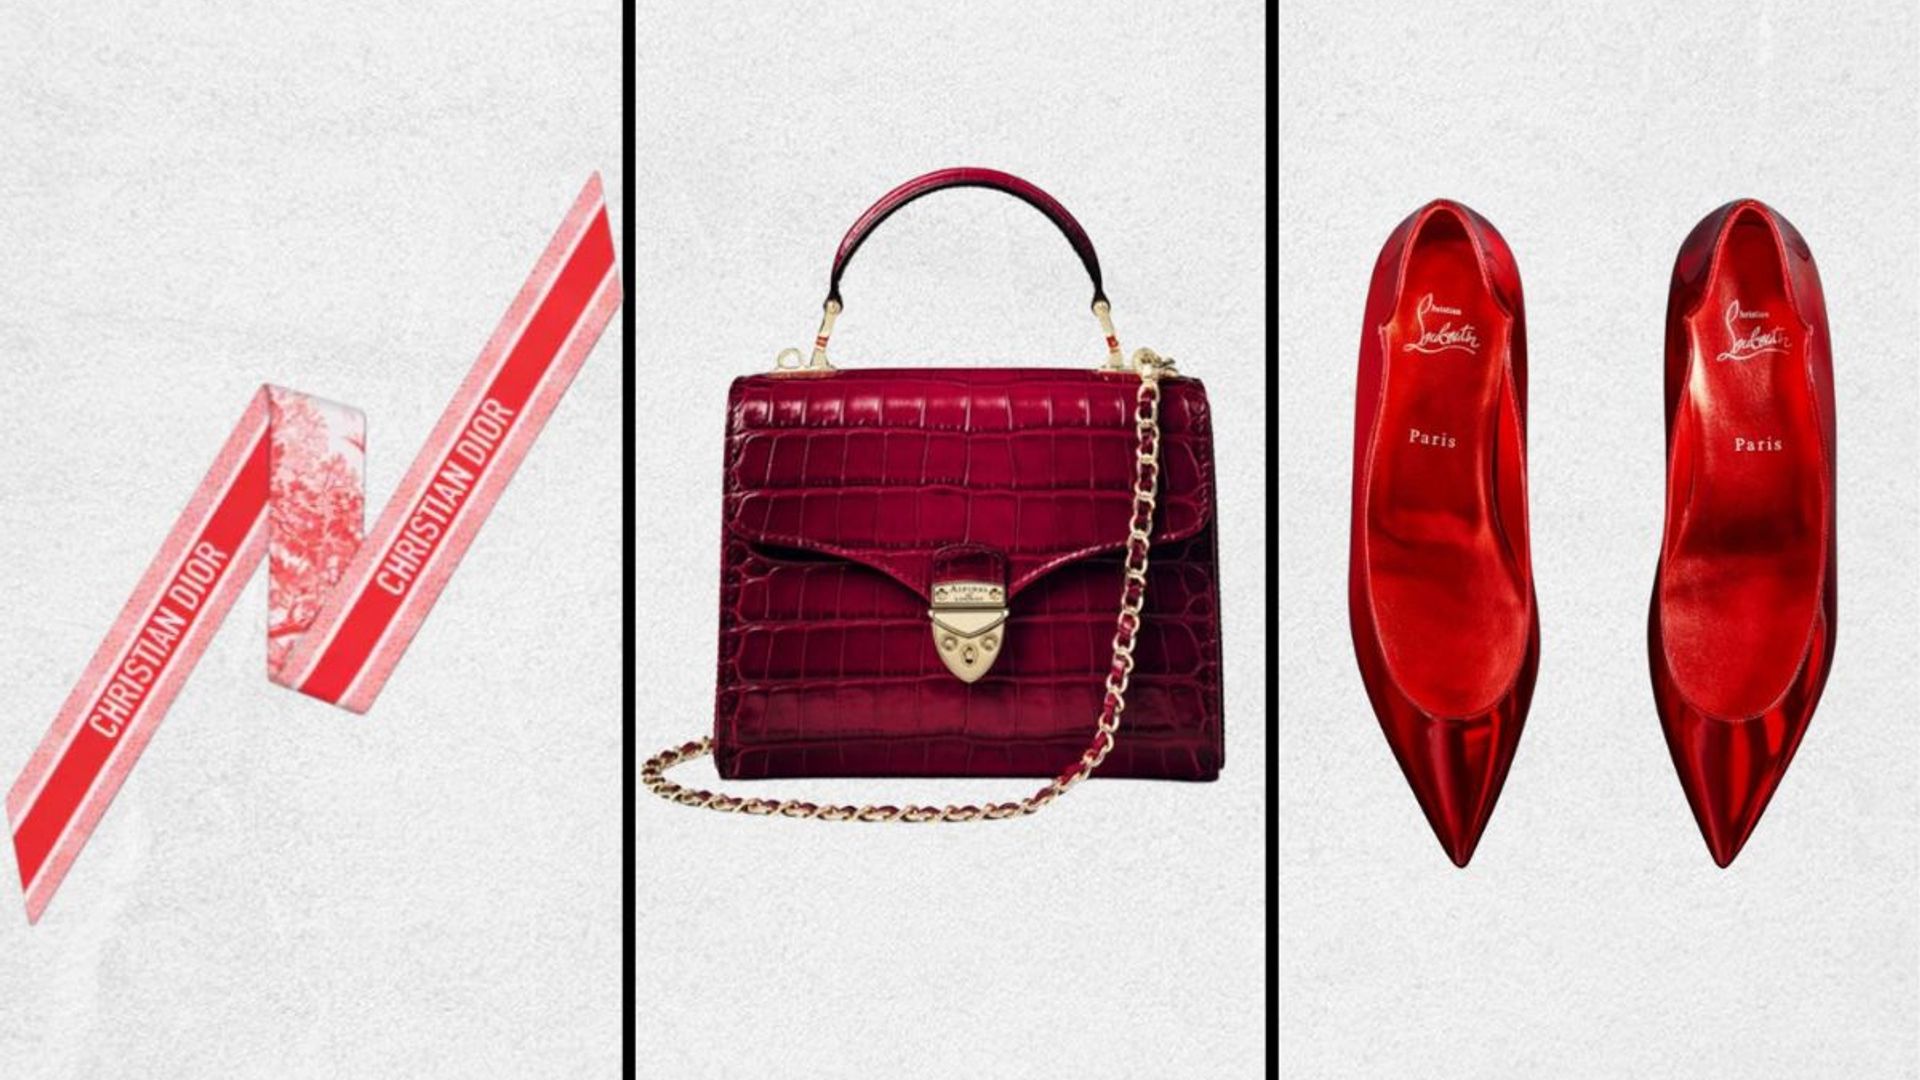 These are the new Christian Dior accessories to treat yourself with